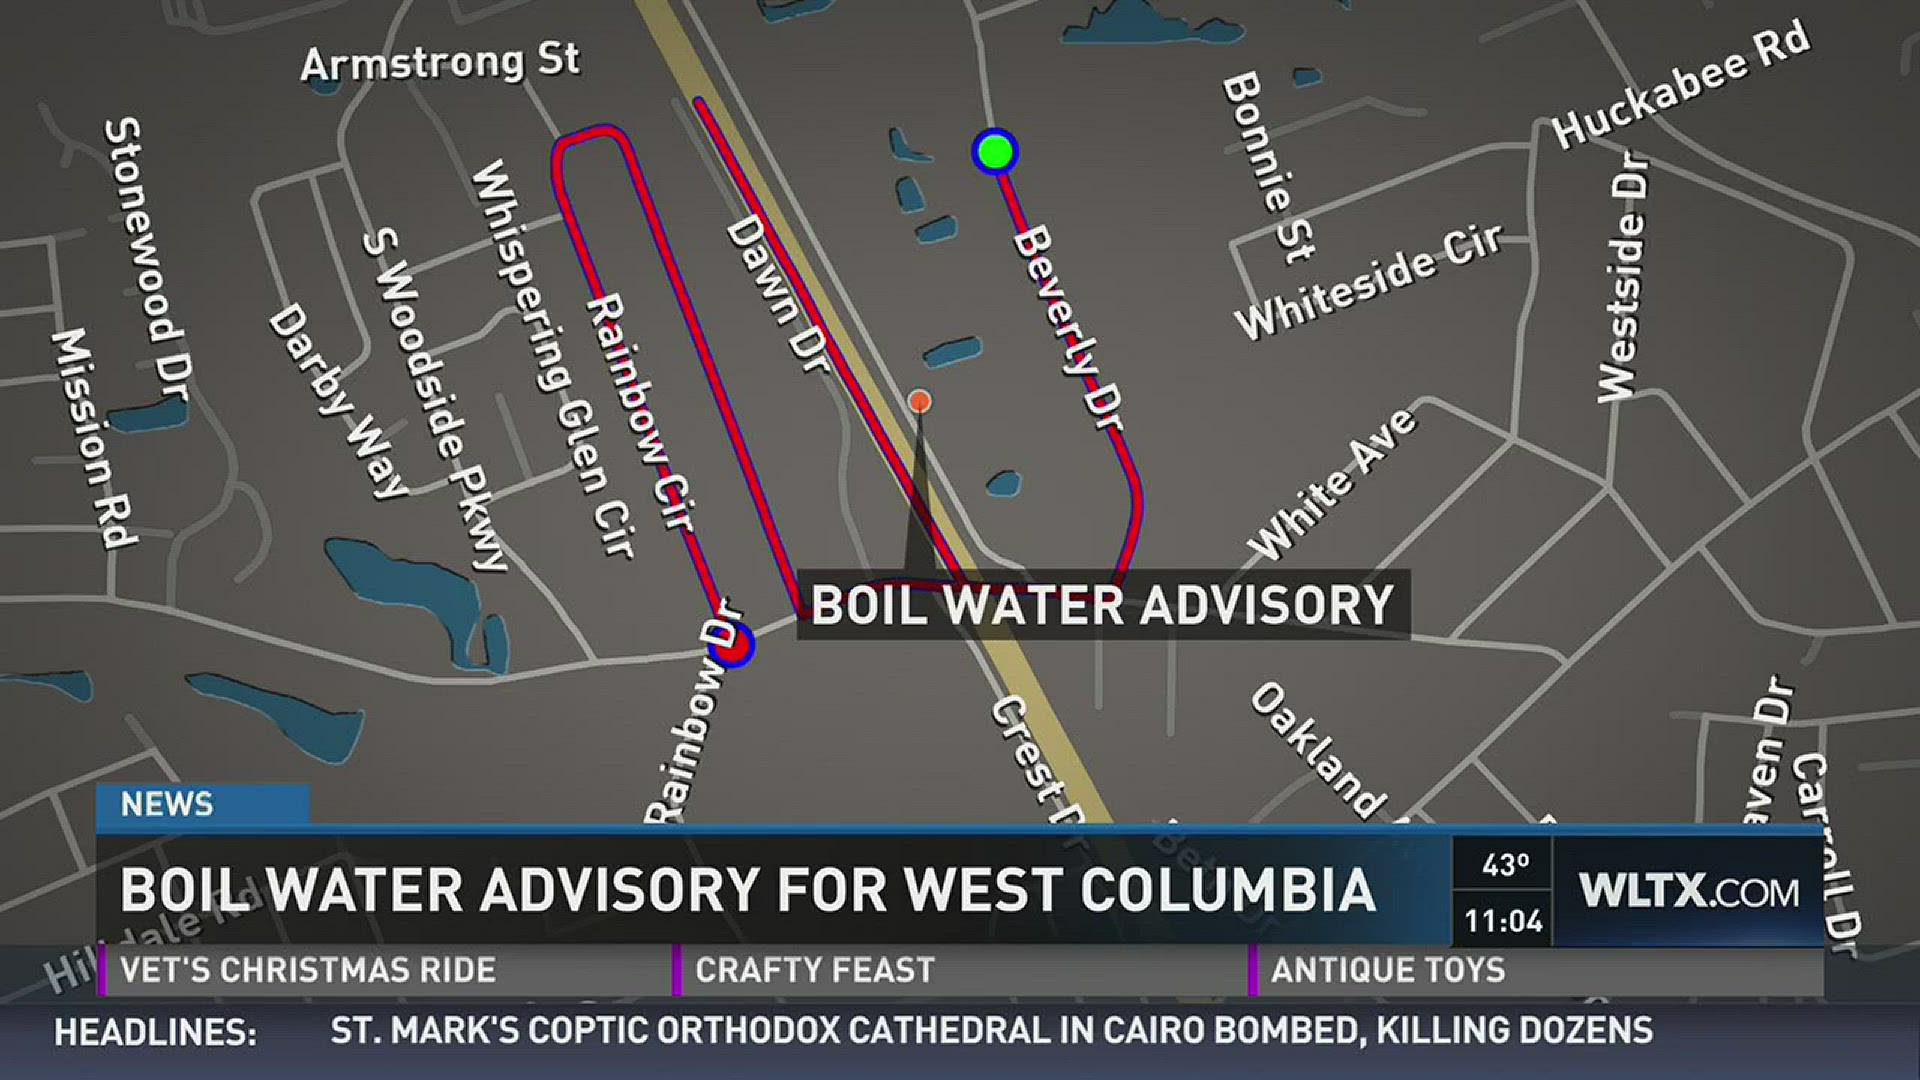 A Boil Water Advisory has been issued for a part of West Columbia.